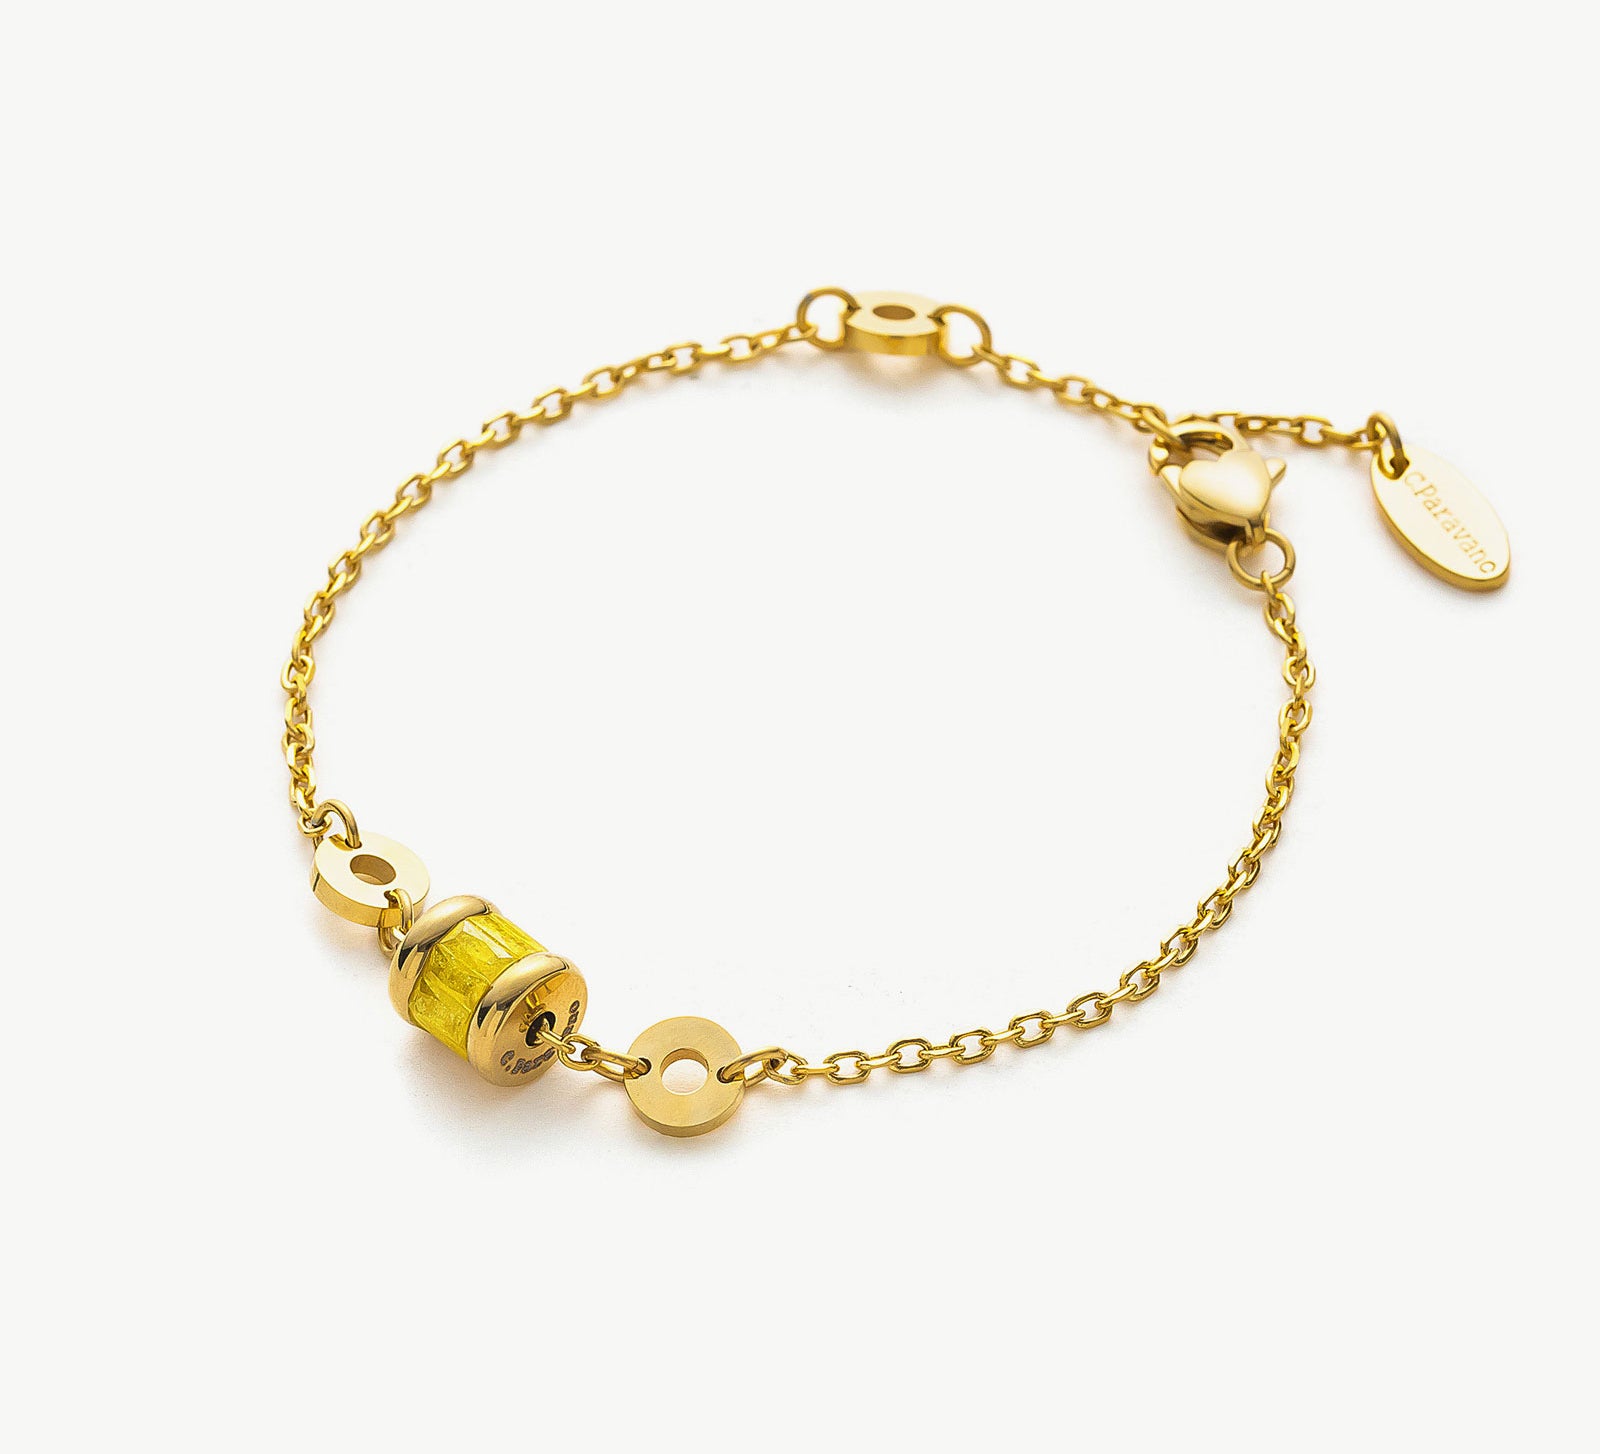 Vintage Agate Bracelet in Gold and Black, a timeless piece that combines the richness of gold with the bold elegance of black agate gemstones, creating a sophisticated and eye-catching accessory.